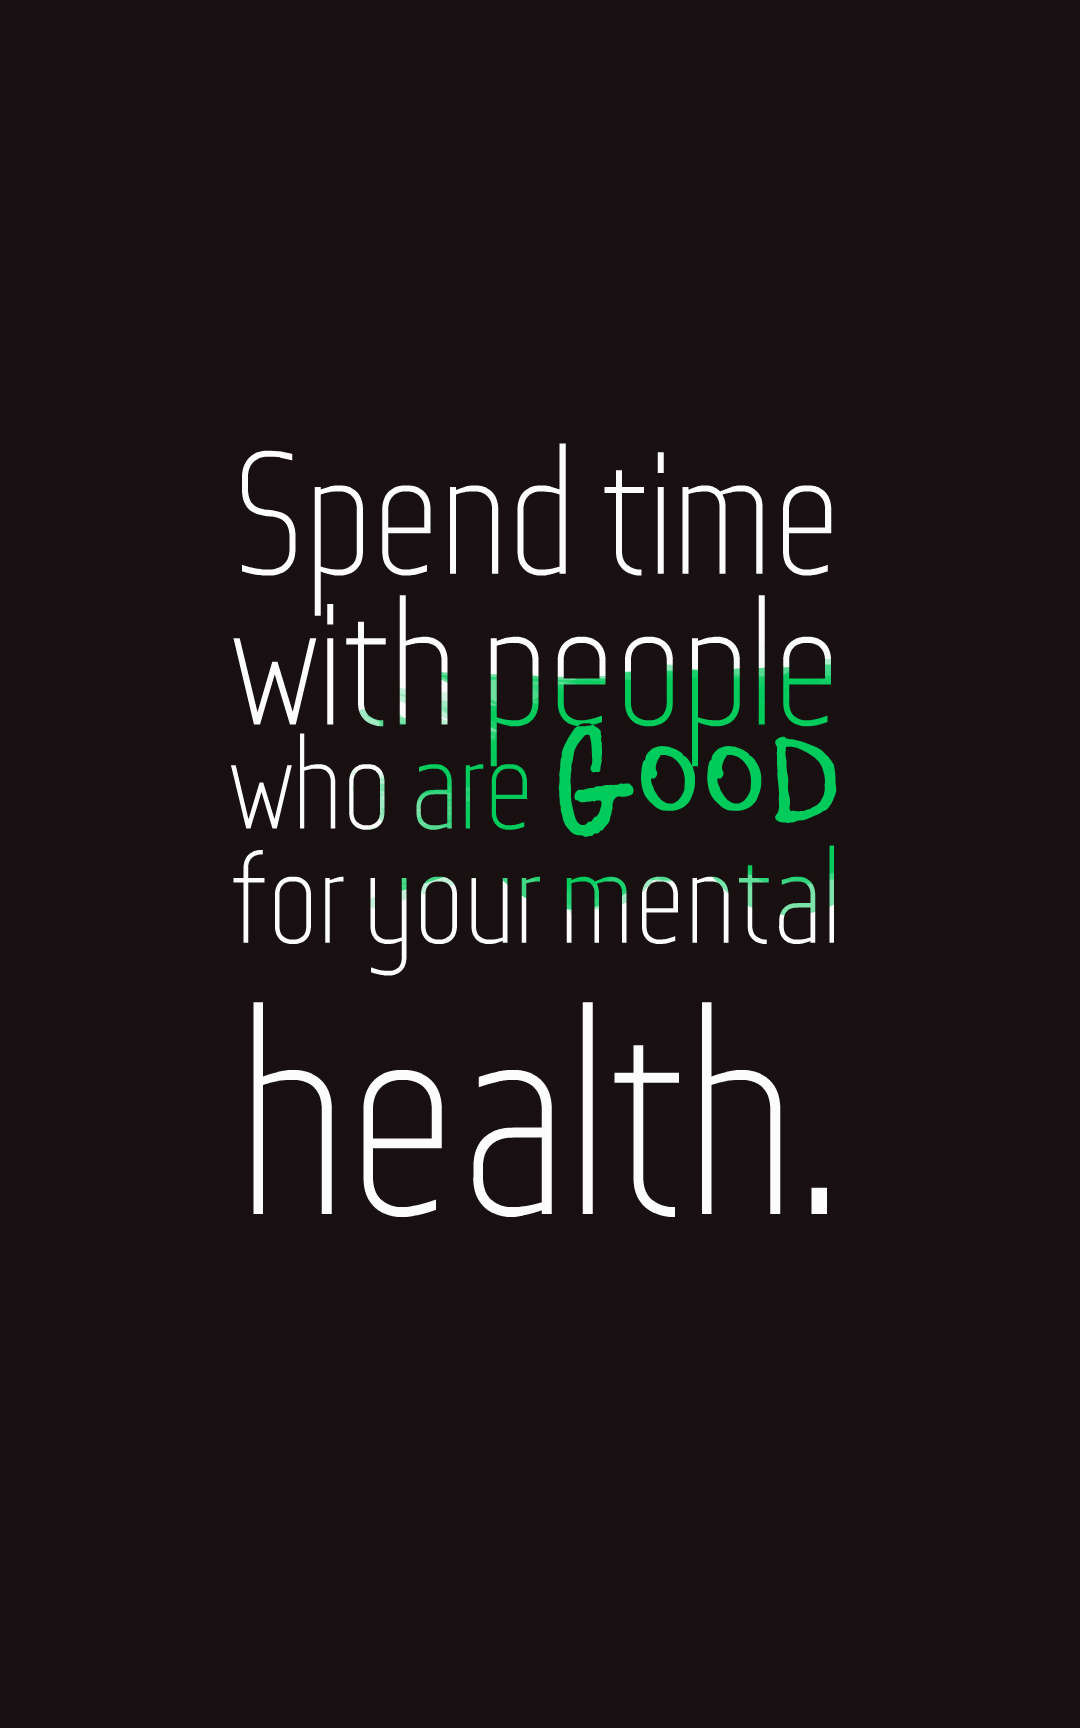 Motivational Health Quote
 35 Inspirational Mental Health Quotes And Sayings